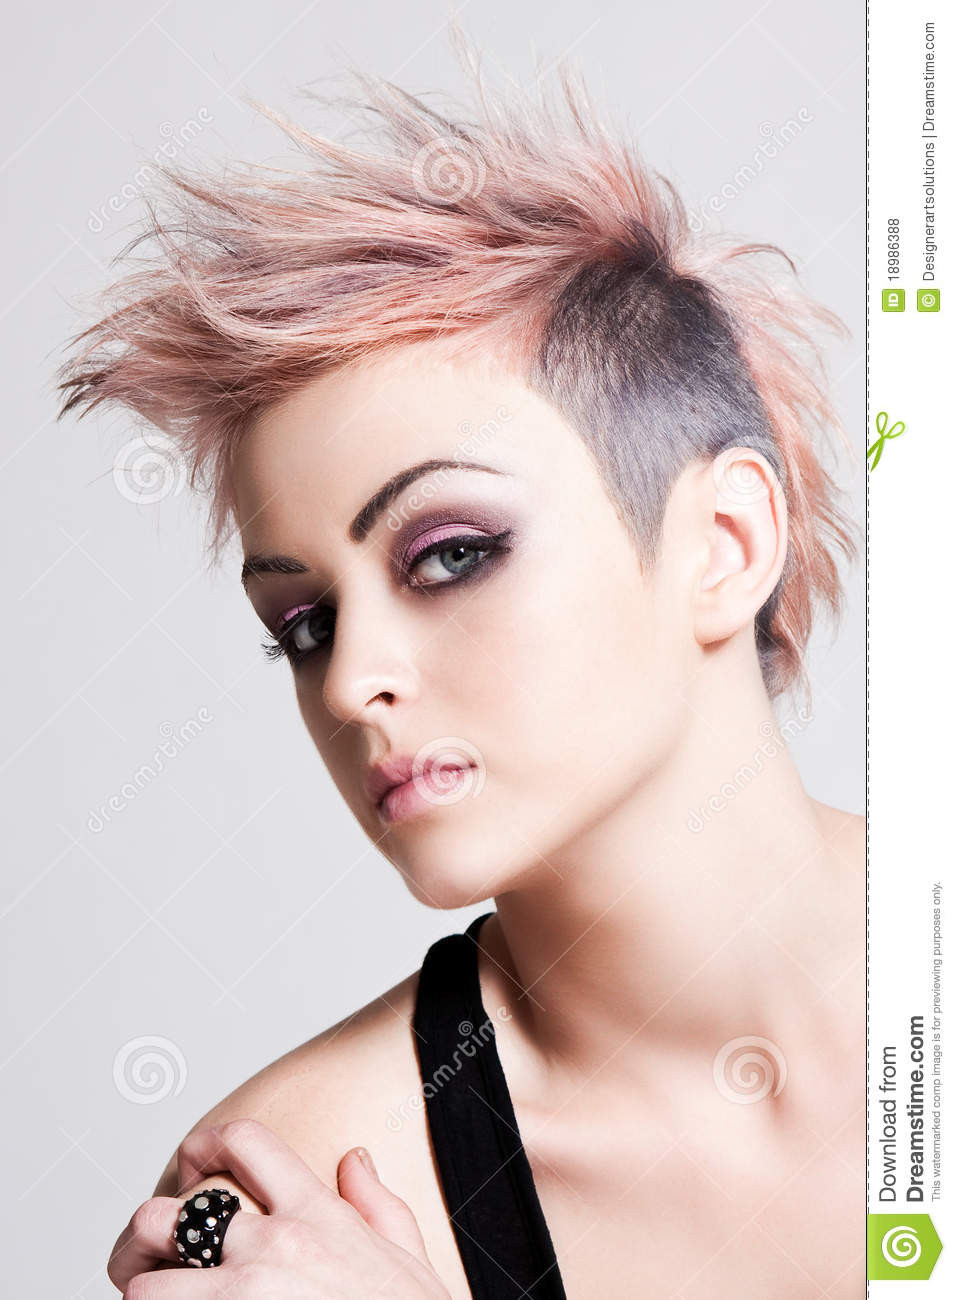 Female Punk Hairstyles
 Young Female Punk With Pink Hair Stock Image of